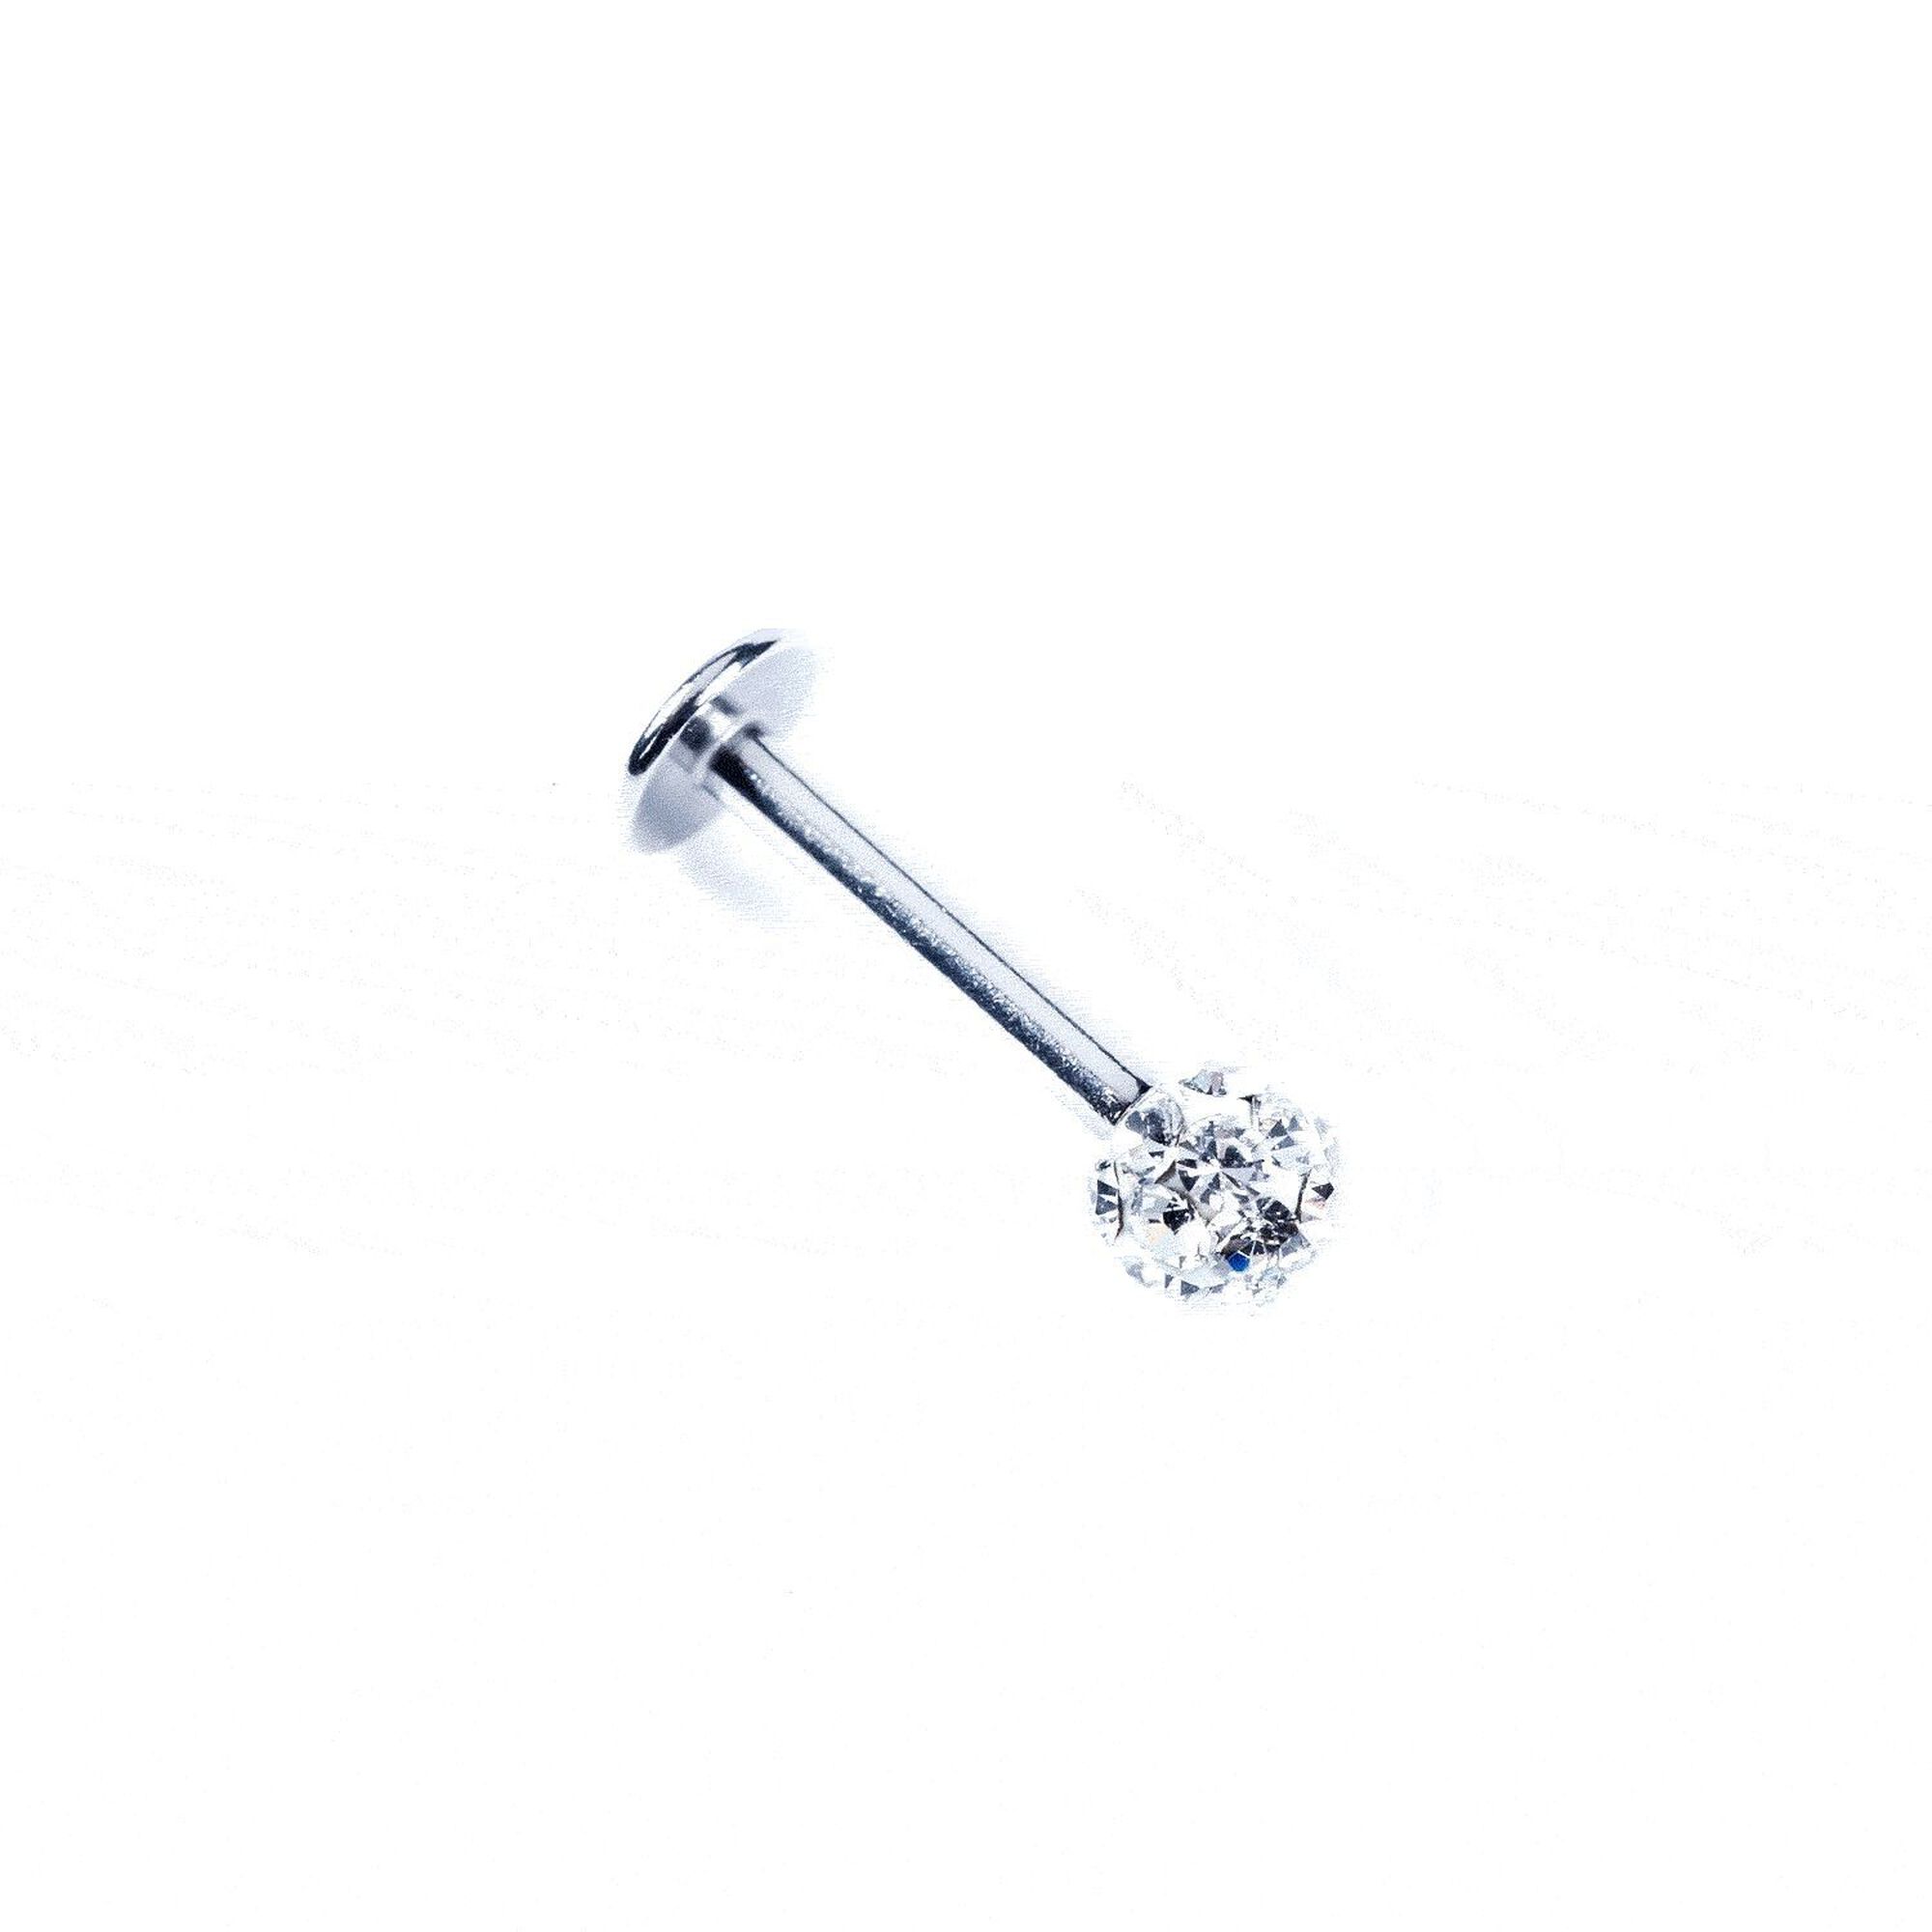 View Claires Tone 16G Fireball Tragus Stud Earring Silver information